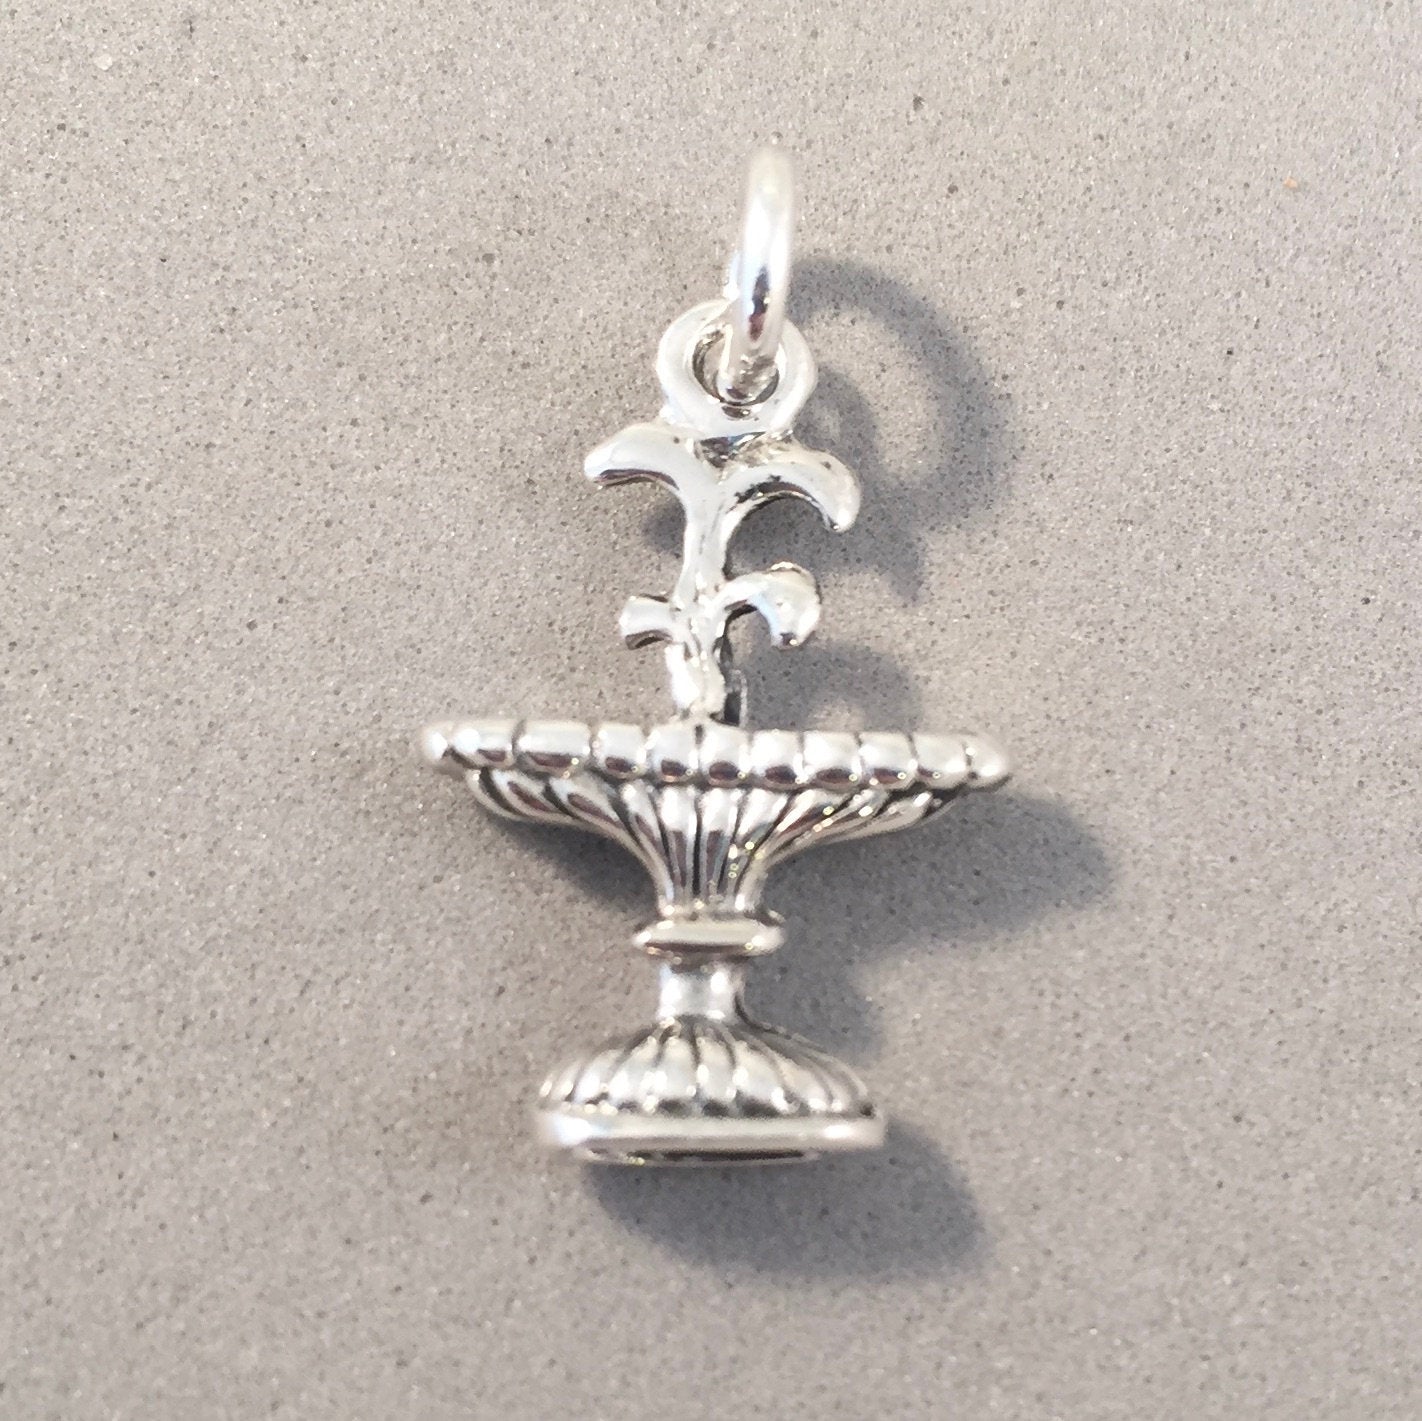 FOUNTAIN .925 Sterling Silver 3-D Charm Pendant Garden Water Patio